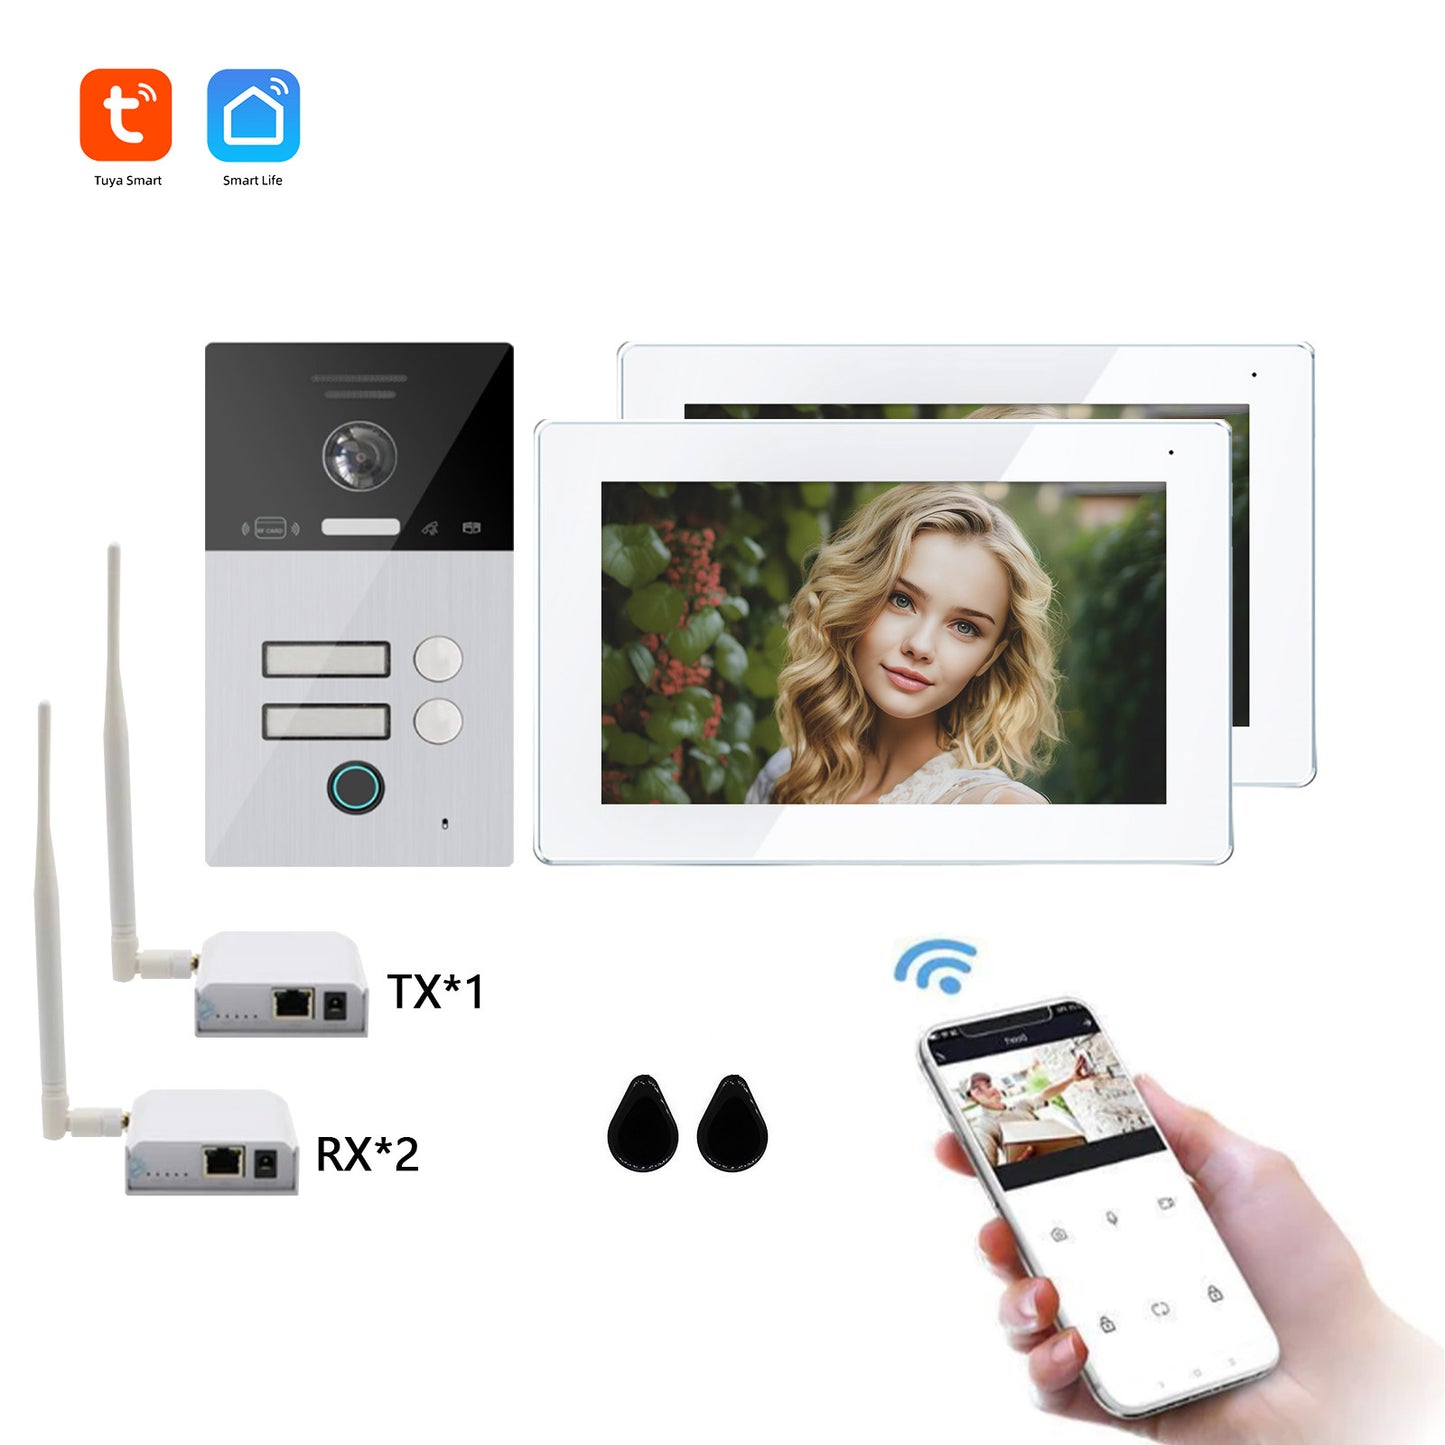 ANJIELOSMART WiFi HaLow Bridge  to connect IP video intercom  For Home 7-Inch Touch Screen Intercom In Private House Monitor 1080P Doorbell Camera With Fingerprint